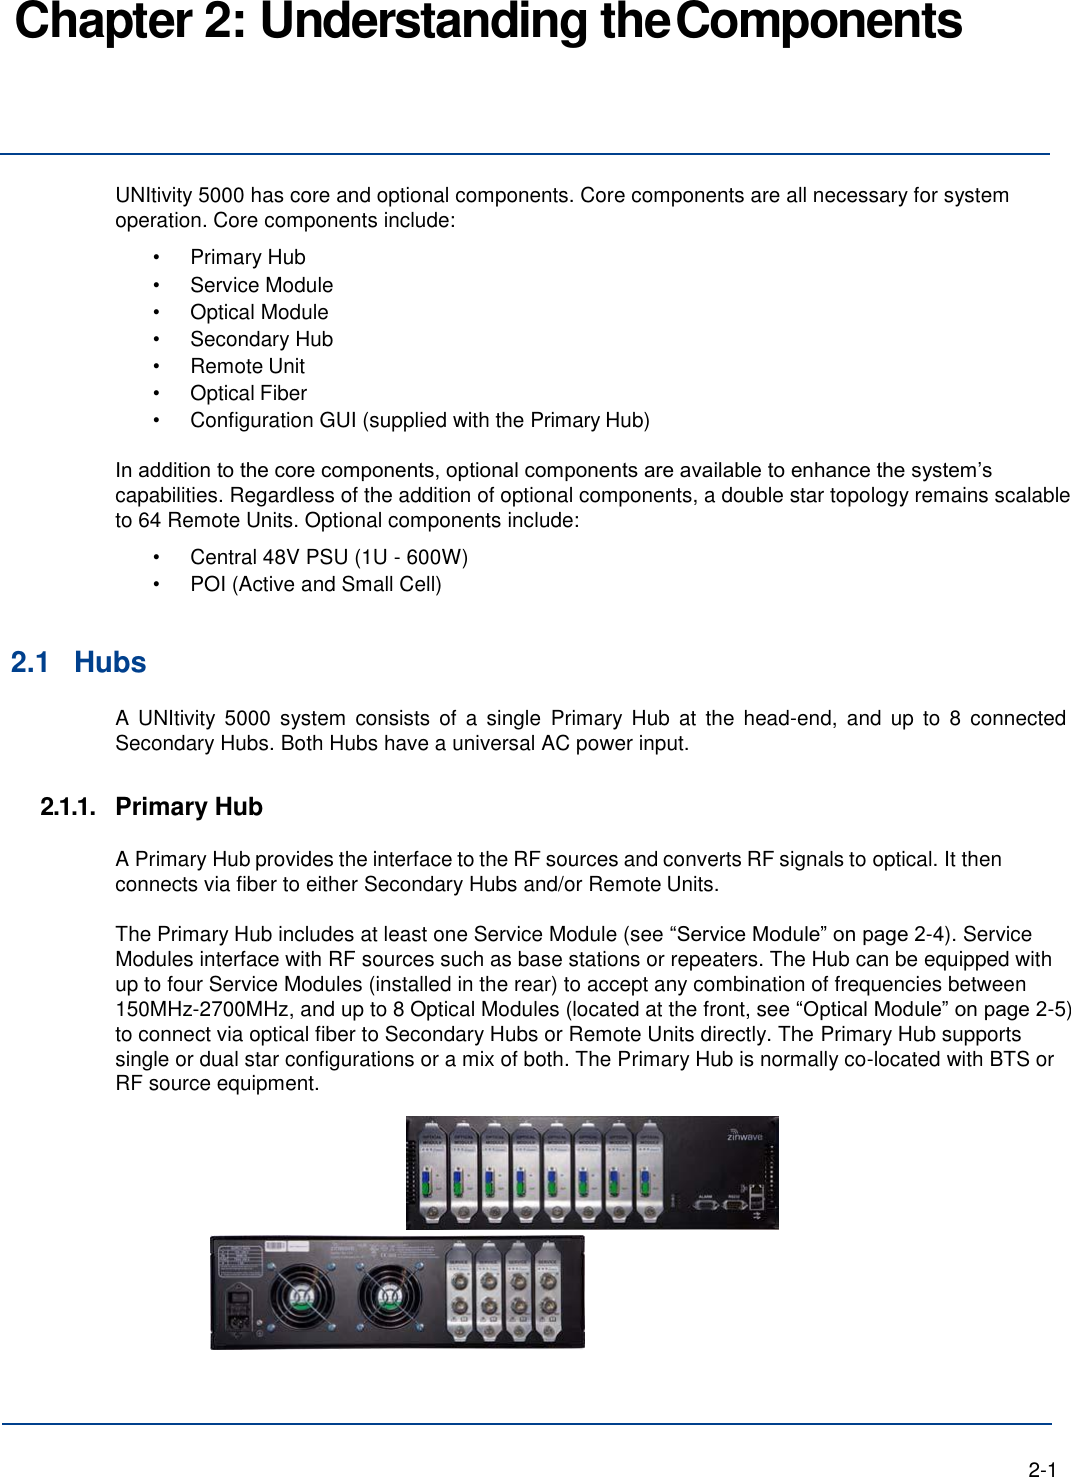 Chapter 2: Understanding the Components     UNItivity 5000 has core and optional components. Core components are all necessary for system operation. Core components include: • Primary Hub • Service Module • Optical Module • Secondary Hub • Remote Unit • Optical Fiber • Configuration GUI (supplied with the Primary Hub)  In addition to the core components, optional components are available to enhance the system’s capabilities. Regardless of the addition of optional components, a double star topology remains scalable to 64 Remote Units. Optional components include: • Central 48V PSU (1U - 600W) • POI (Active and Small Cell)   2.1 Hubs A UNItivity  5000 system  consists of  a  single  Primary  Hub  at  the  head-end,  and  up to  8  connected Secondary Hubs. Both Hubs have a universal AC power input.  2.1.1.  Primary Hub  A Primary Hub provides the interface to the RF sources and converts RF signals to optical. It then connects via fiber to either Secondary Hubs and/or Remote Units.  The Primary Hub includes at least one Service Module (see “Service Module” on page 2-4). Service Modules interface with RF sources such as base stations or repeaters. The Hub can be equipped with up to four Service Modules (installed in the rear) to accept any combination of frequencies between 150MHz-2700MHz, and up to 8 Optical Modules (located at the front, see “Optical Module” on page 2-5) to connect via optical fiber to Secondary Hubs or Remote Units directly. The Primary Hub supports single or dual star configurations or a mix of both. The Primary Hub is normally co-located with BTS or RF source equipment.         2-1 